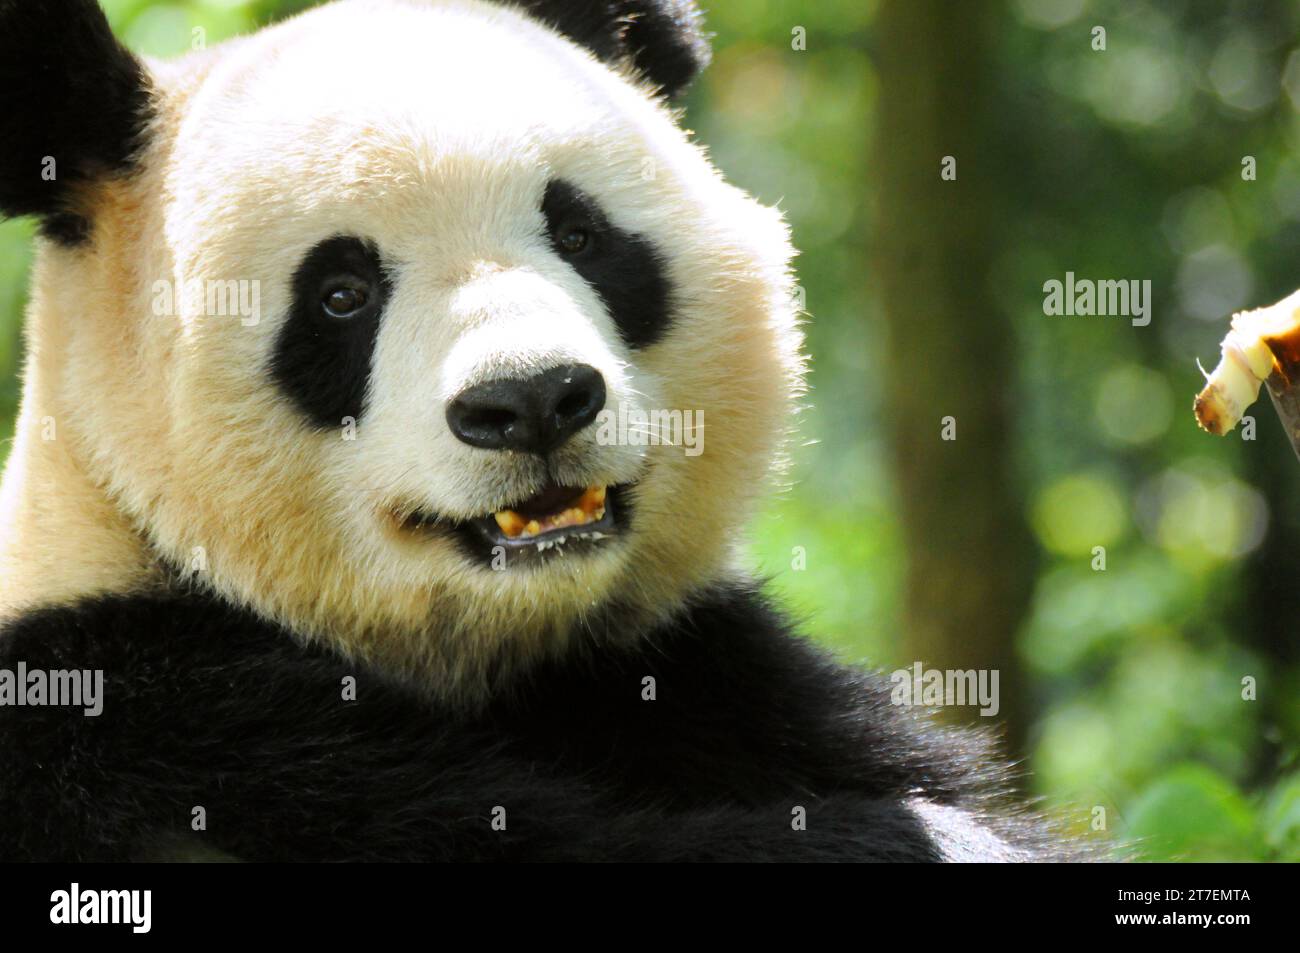 Giant Panda in Wolong National Nature Reserve, Sichuan, China Stock Photo